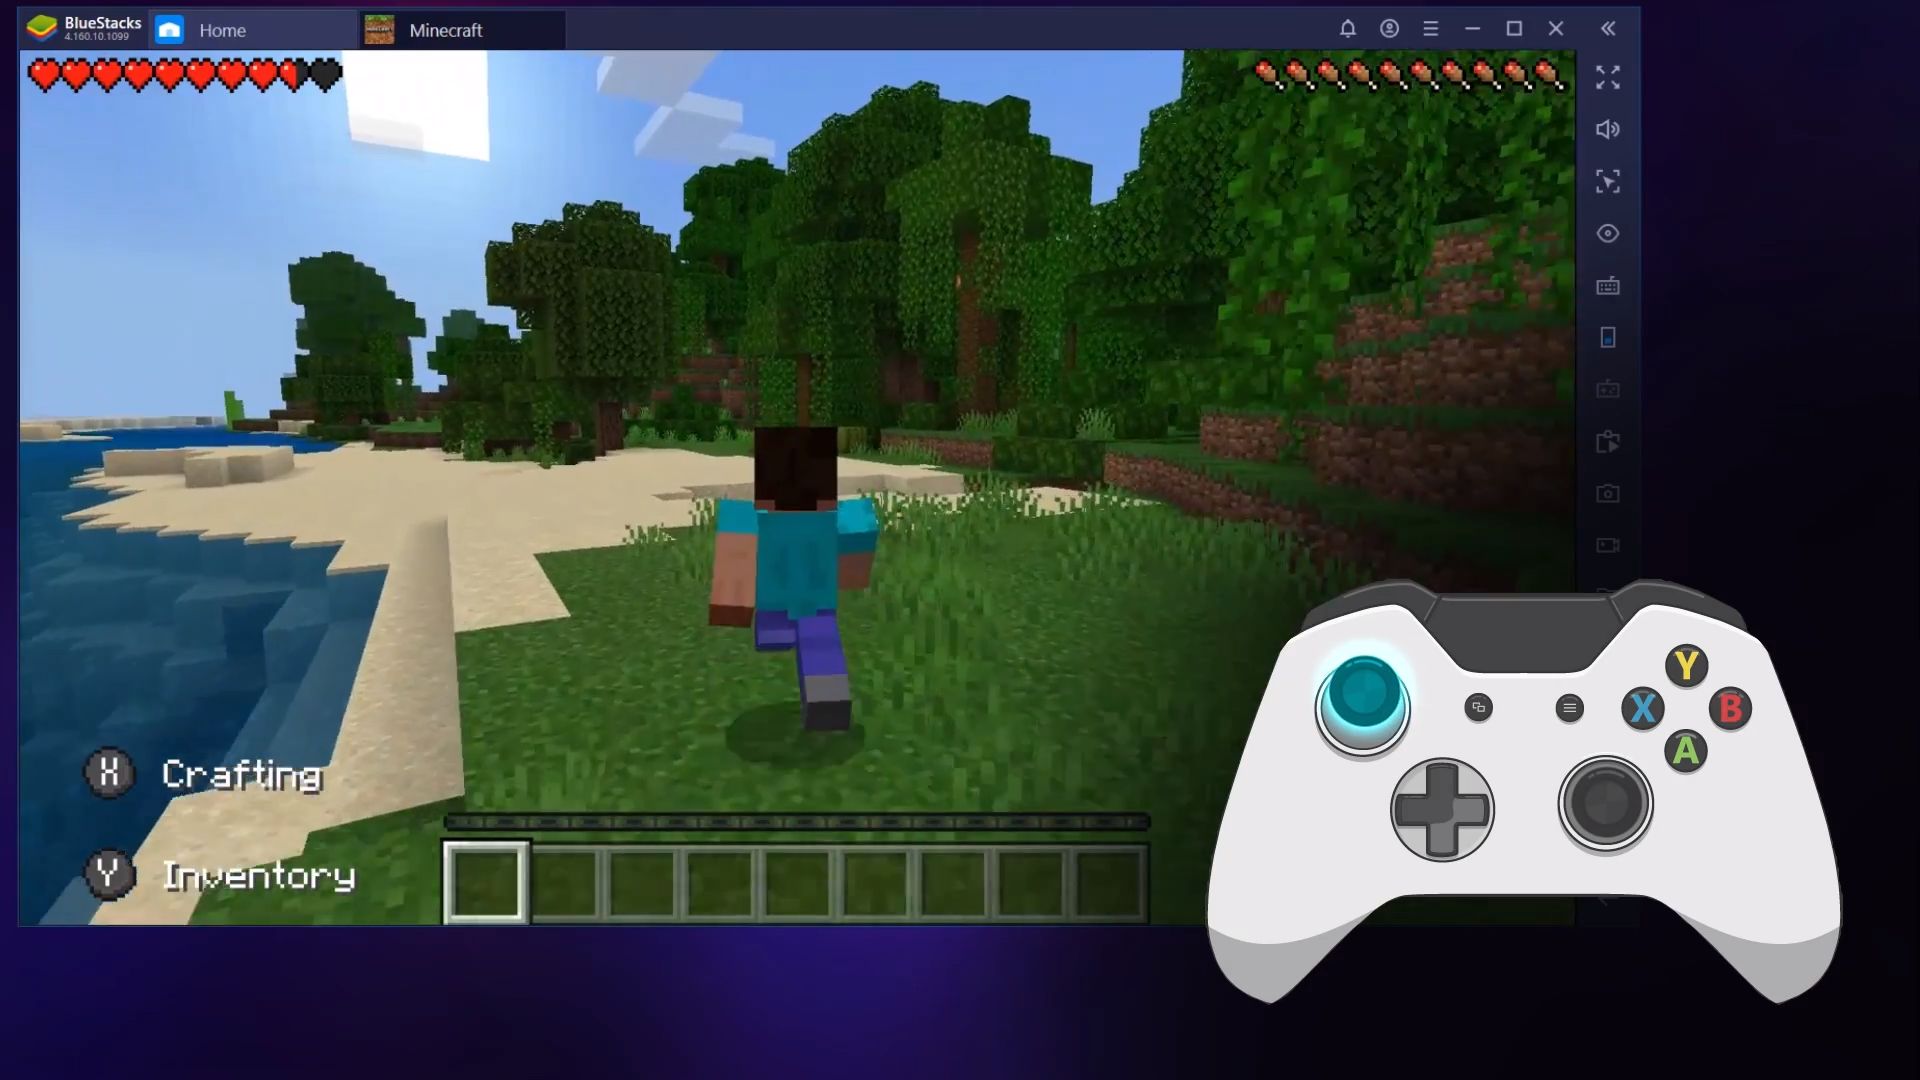 Native Gamepad Support Gaming With Controllers On Bluestacks Just Got Better